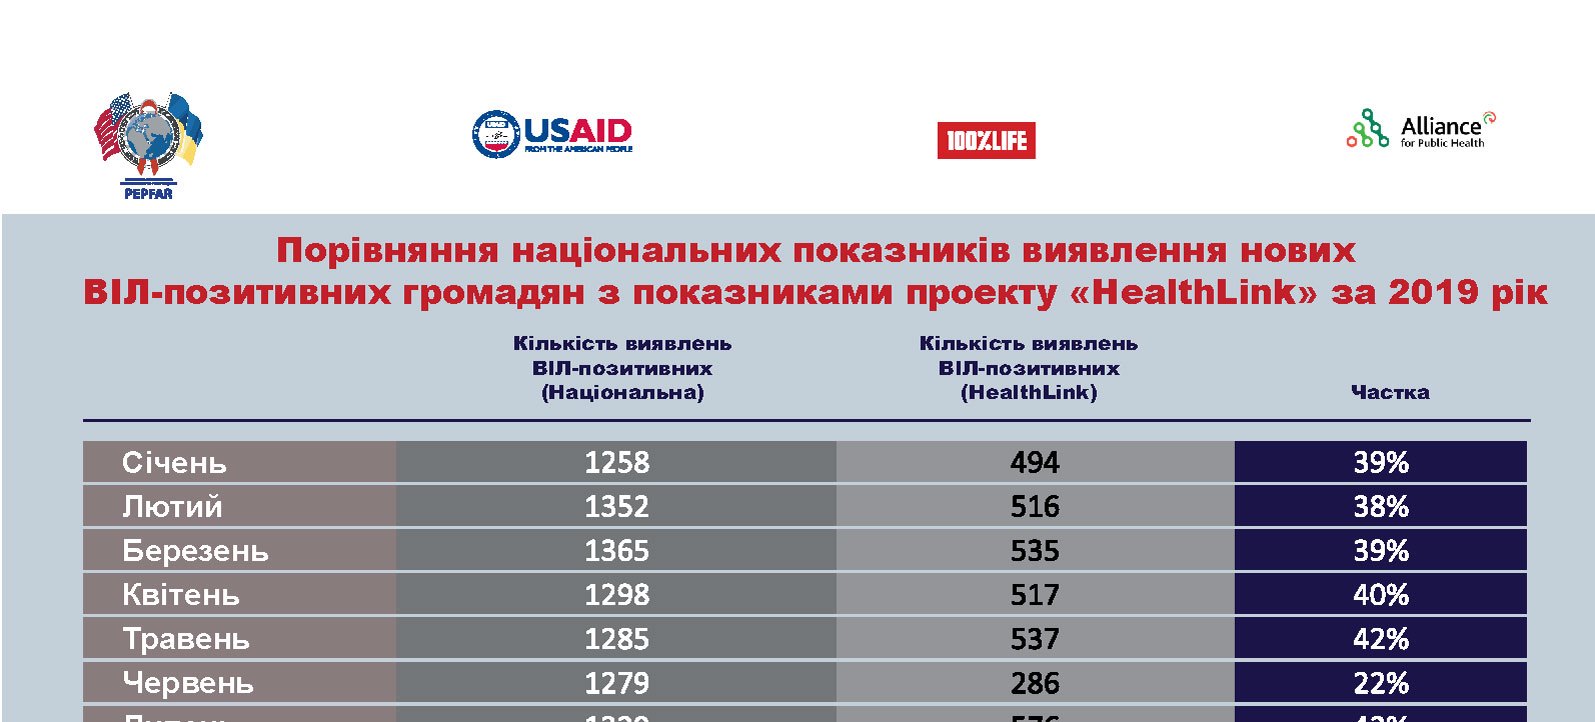 About 6 000 lives saved: USAID HealthLink saved every third new HIV patient in 2019